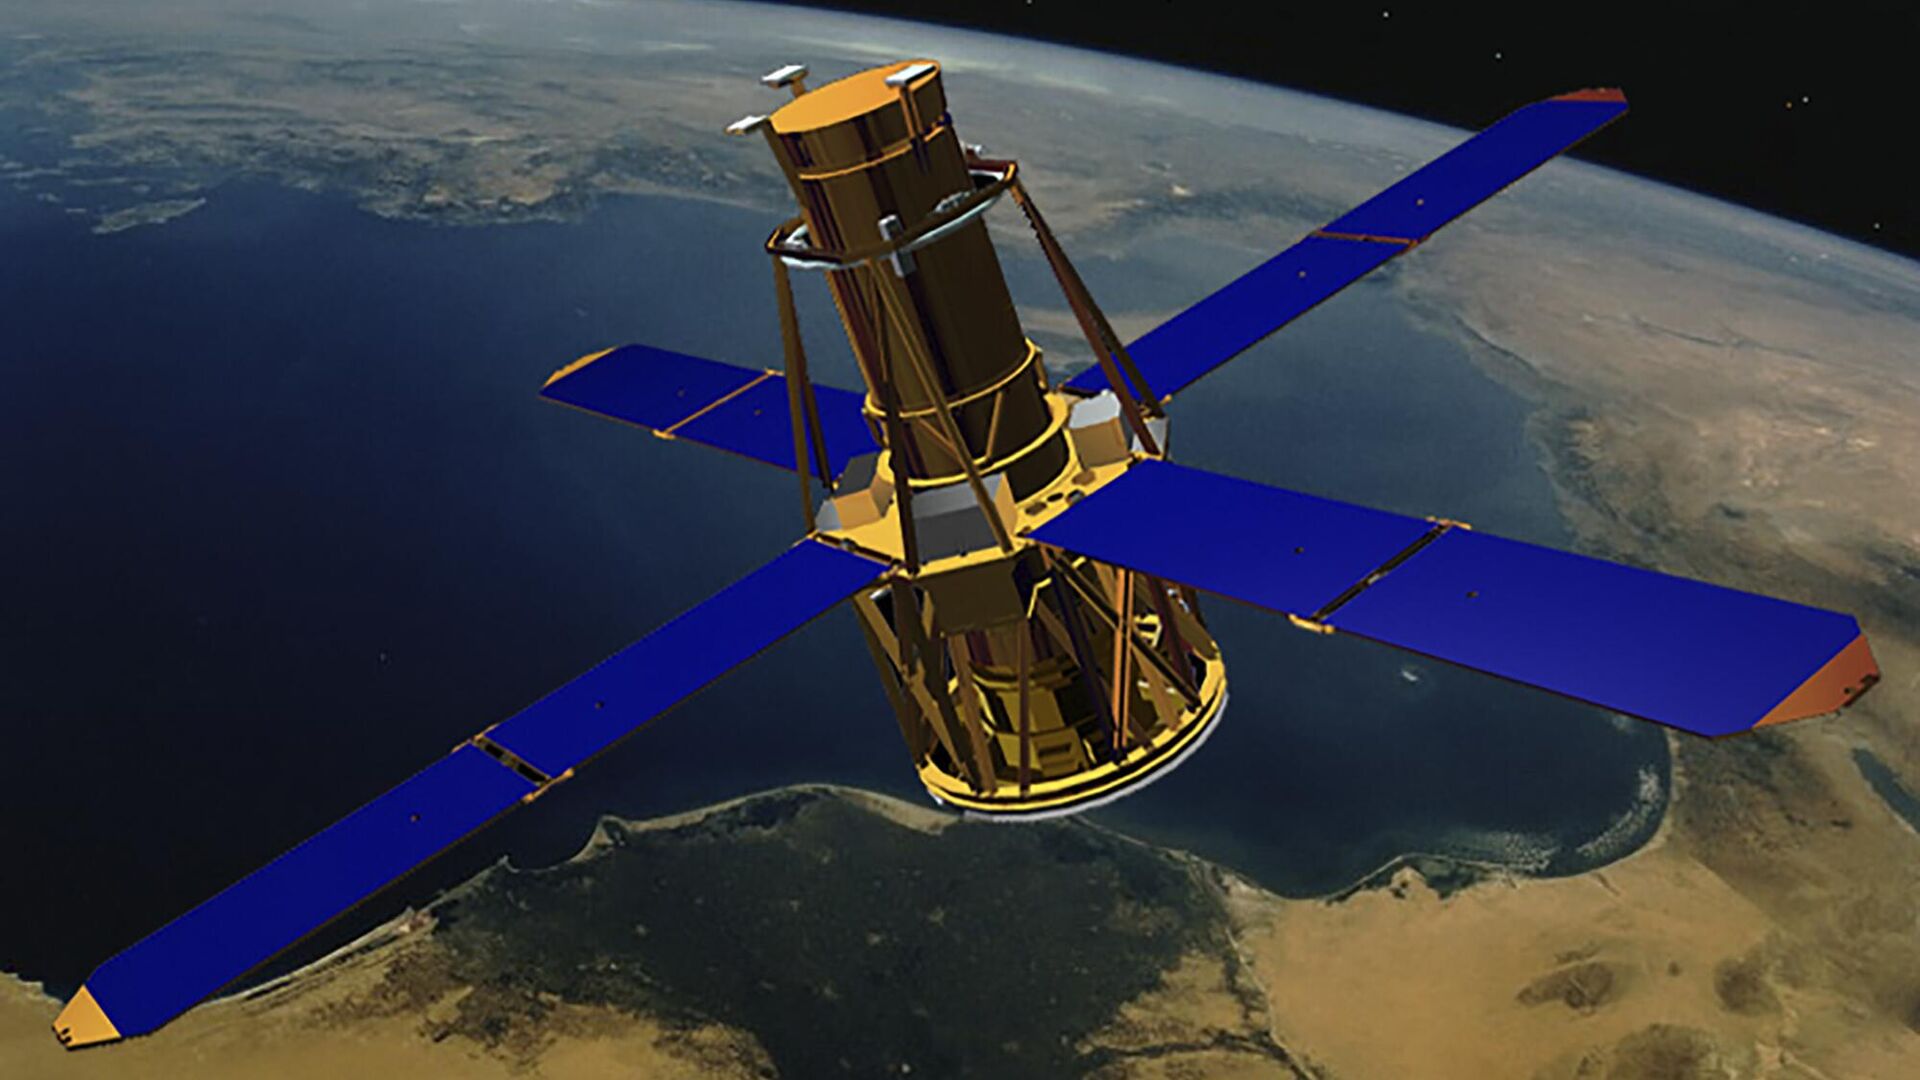 This illustration provided by NASA depicts the RHESSI (Reuven Ramaty High Energy Solar Spectroscopic Imager) solar observation satellite. The defunct science satellite will plummet through the atmosphere Wednesday night, April 19, 2023, according to NASA and the Defense Department. Experts tracking the spacecraft say chances are low it will pose any danger.  - Sputnik International, 1920, 19.04.2023